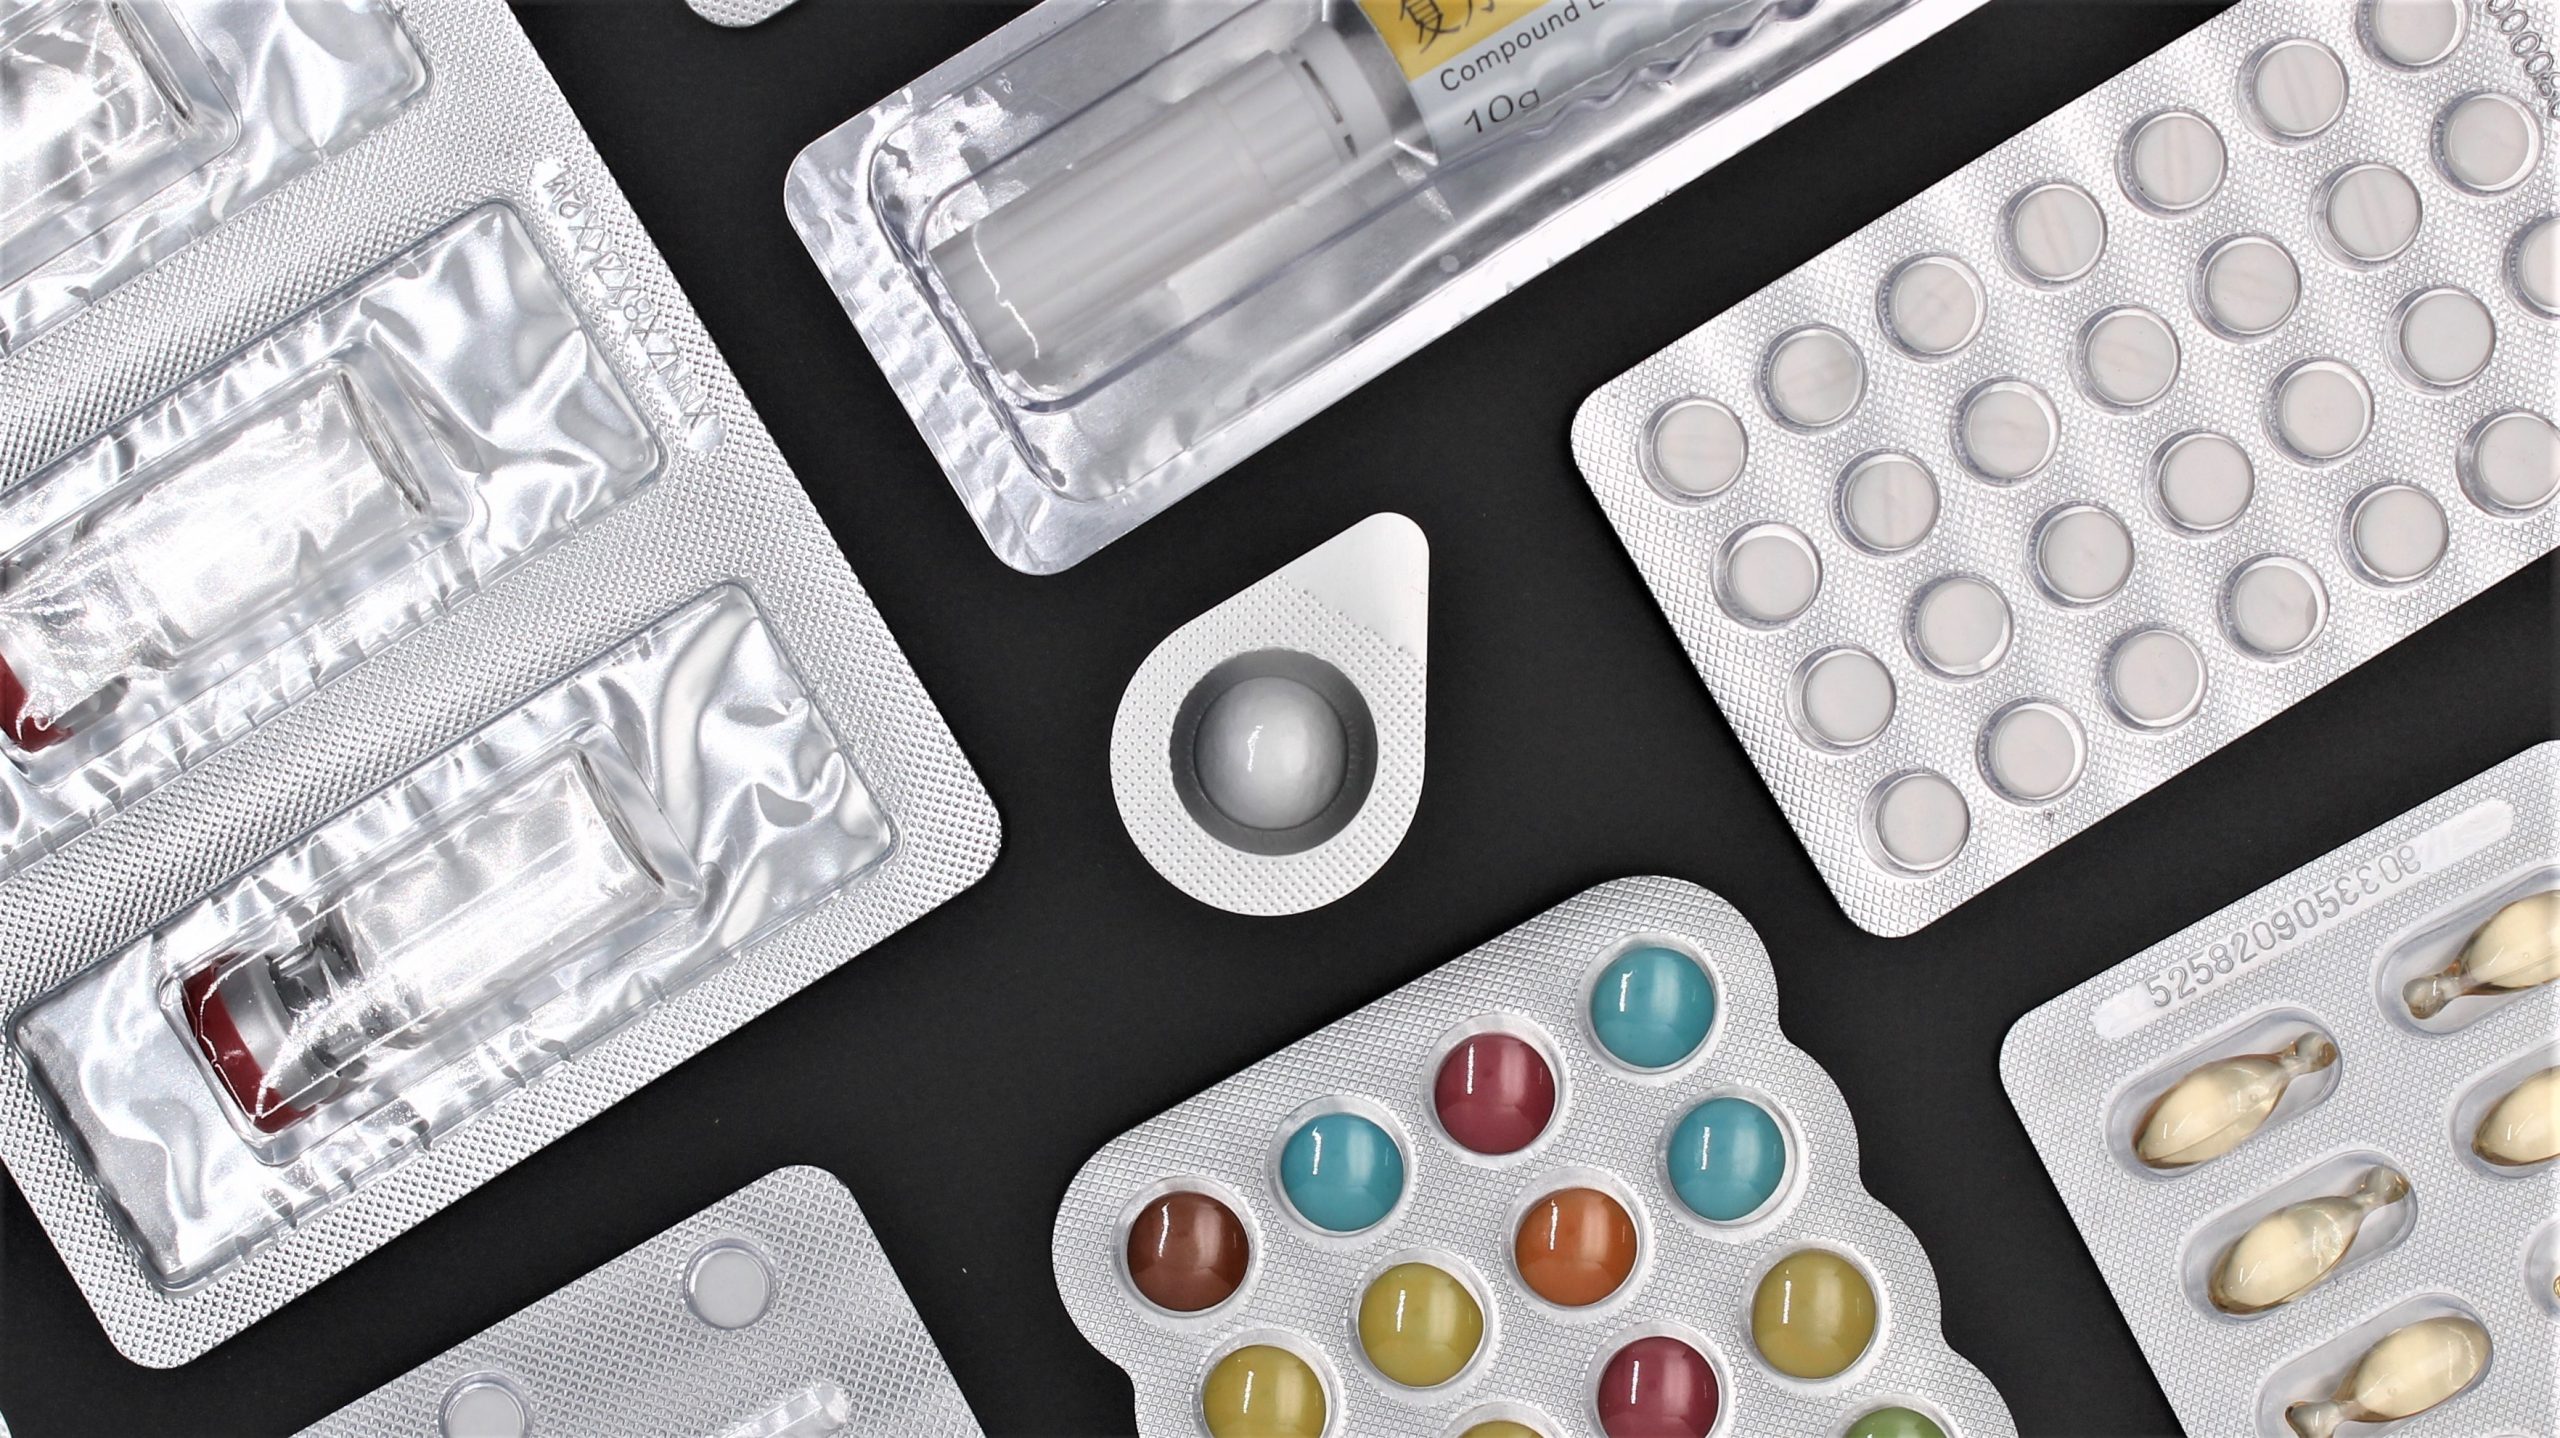 Aluminum products are used in pharmaceutical packaging